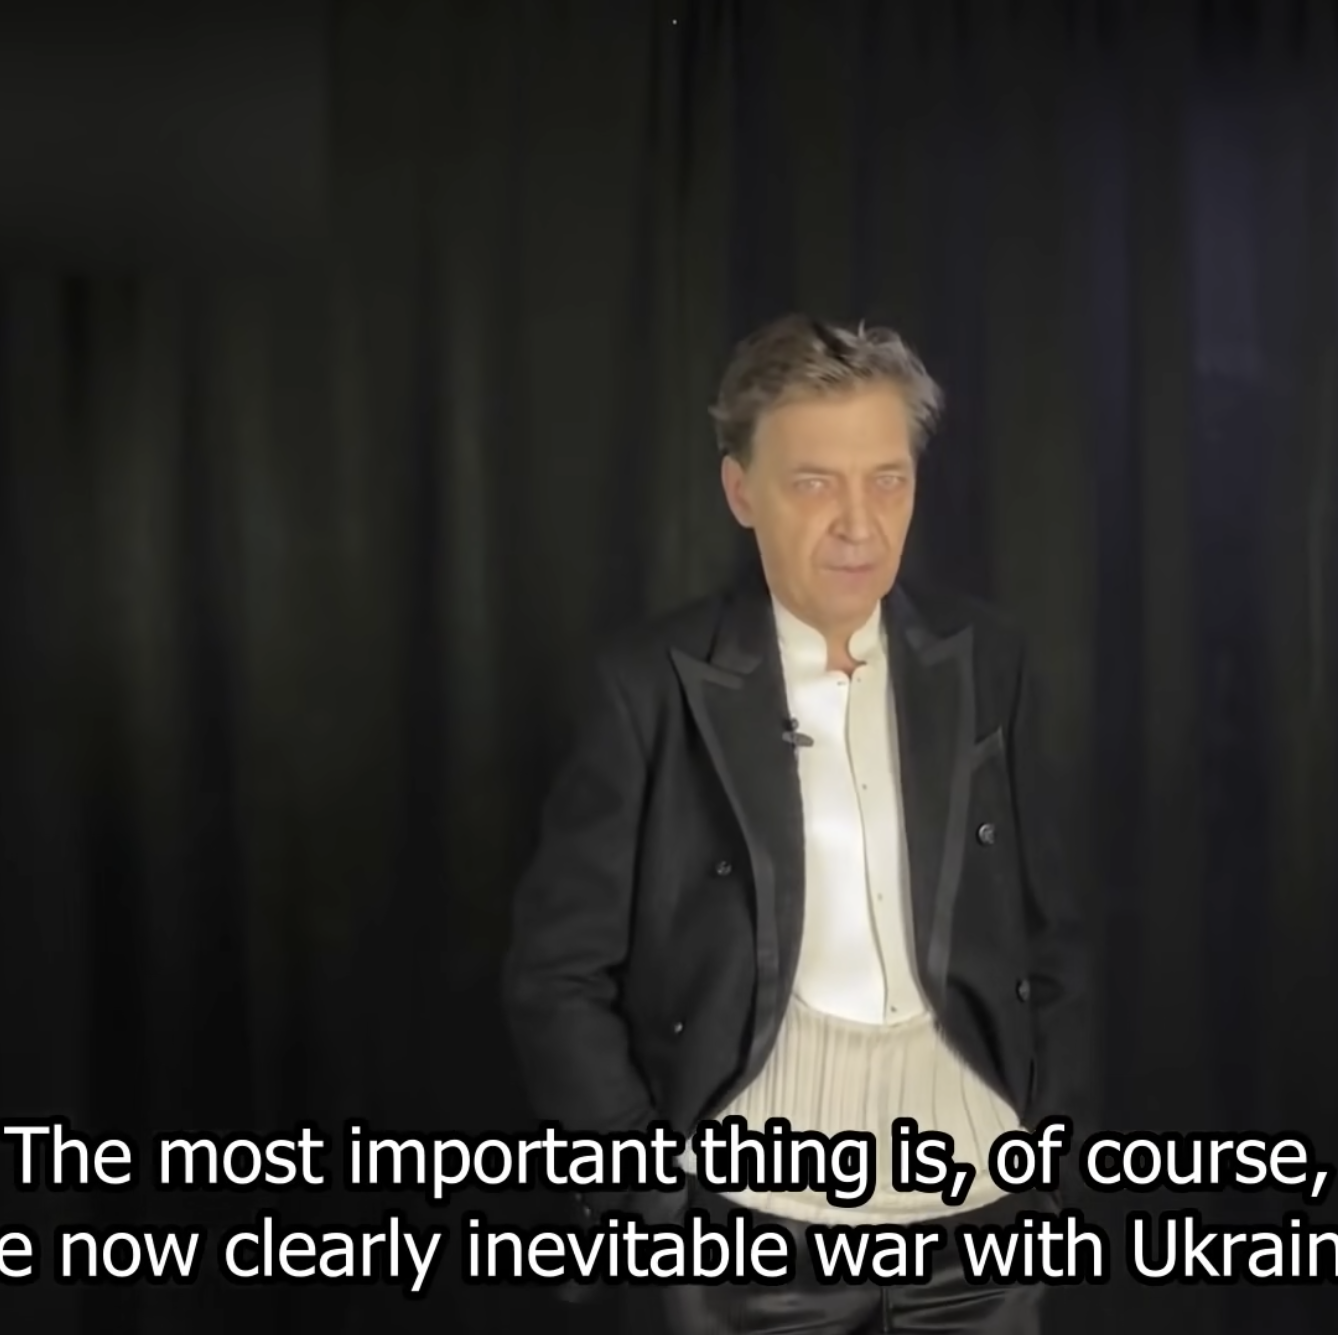 Watch This Russian Journalist and Former Politician Predict the Outcome in Ukraine Back in April 2021